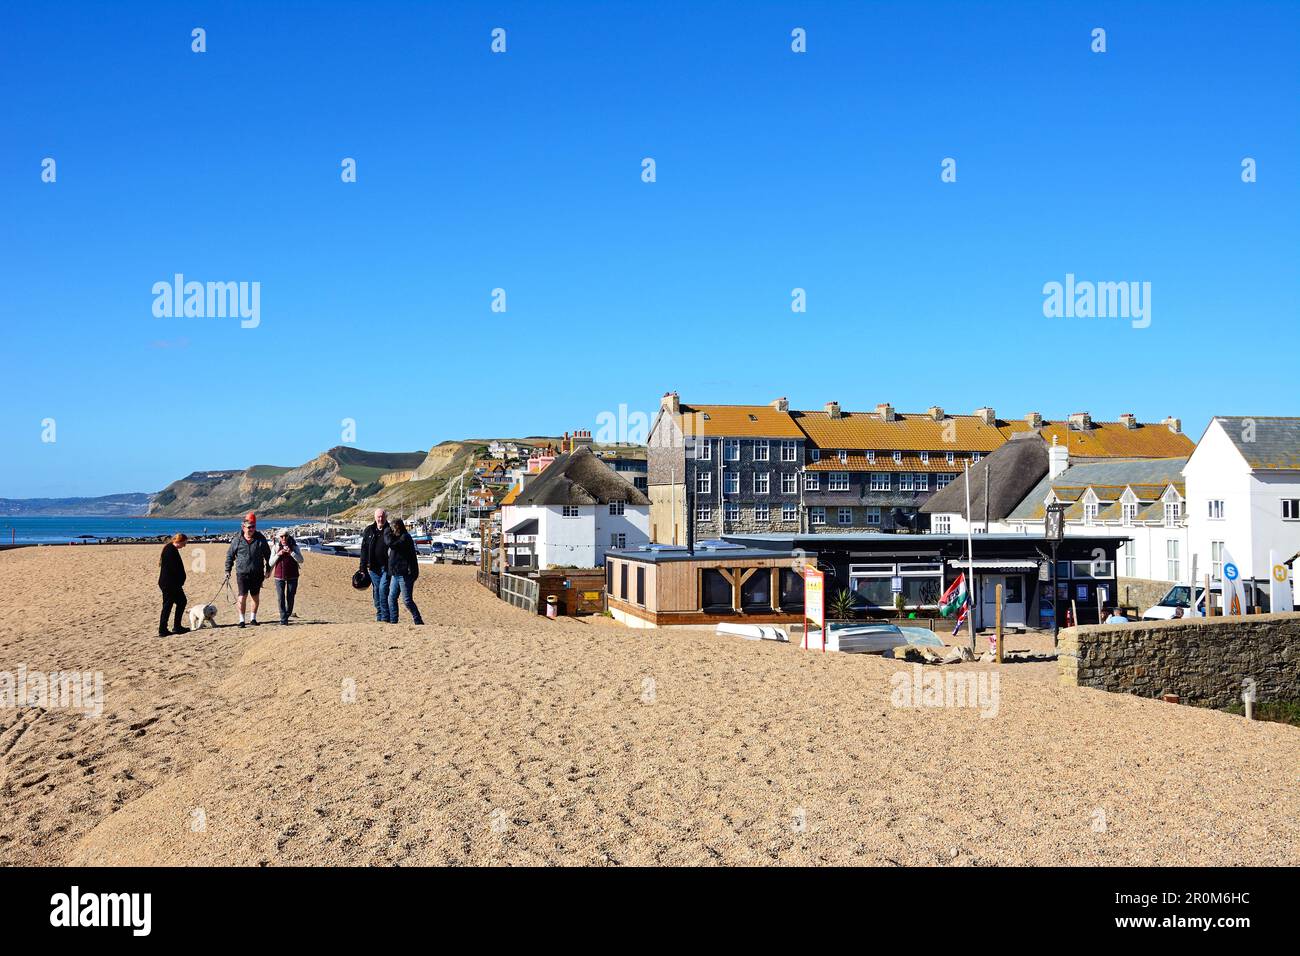 People walking along the pebble beach with views of the town and coastline, West Bay, Dorset, UK, Europe. Stock Photo